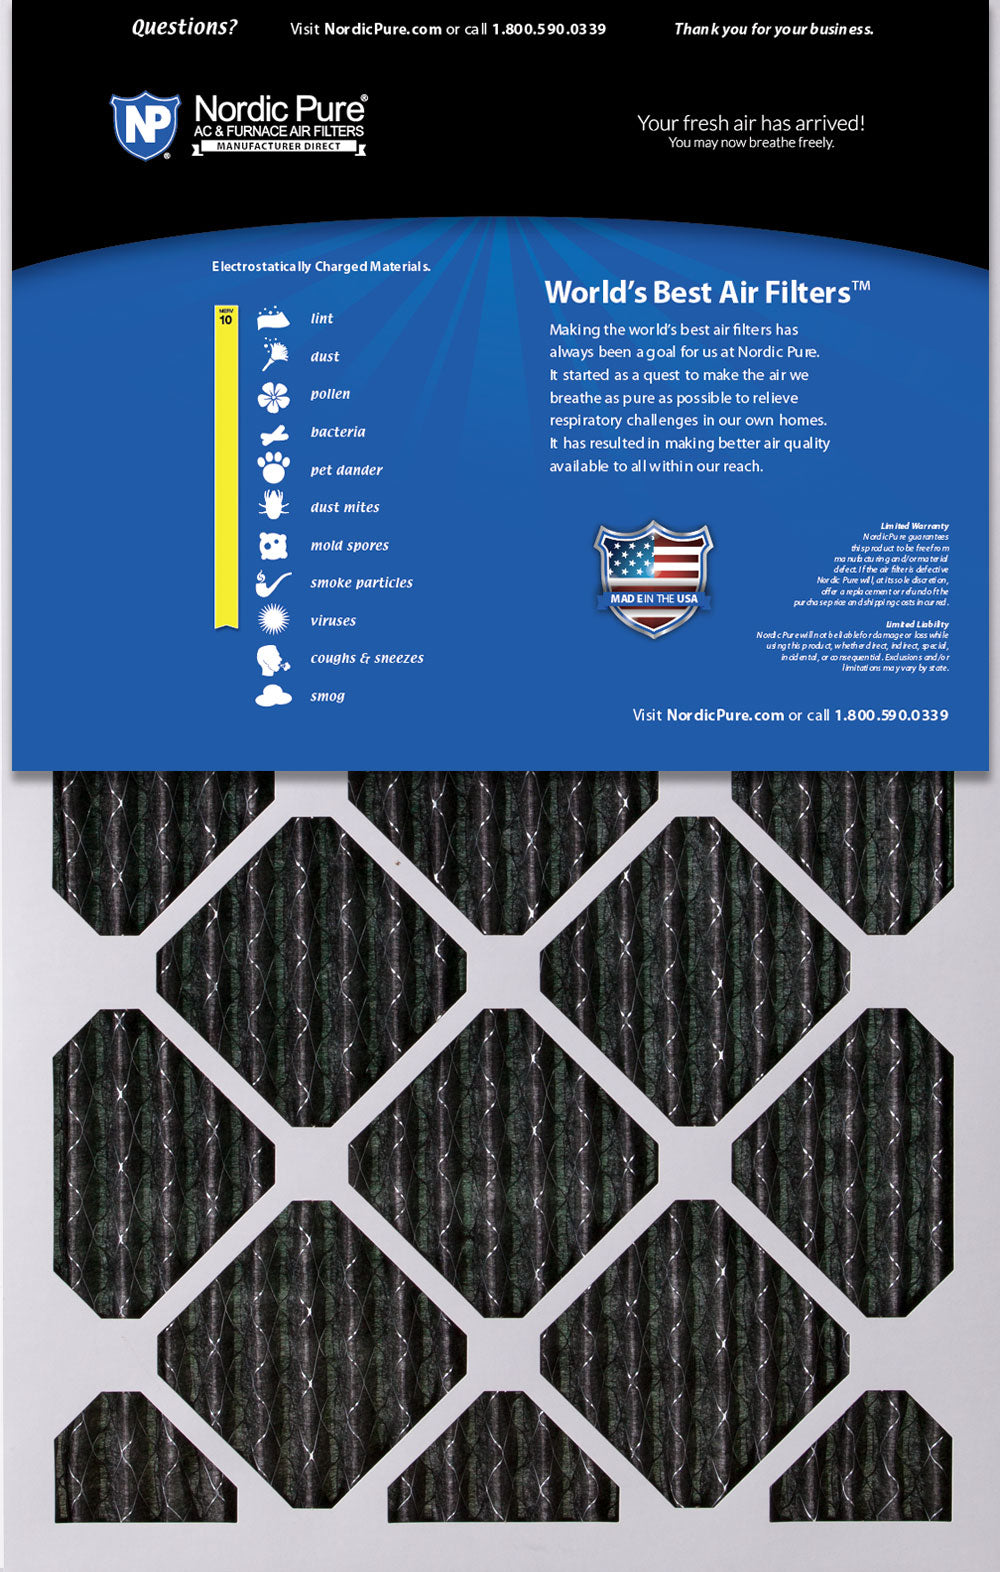 10x20x1 Furnace Air Filters MERV 10 Pleated Plus Carbon